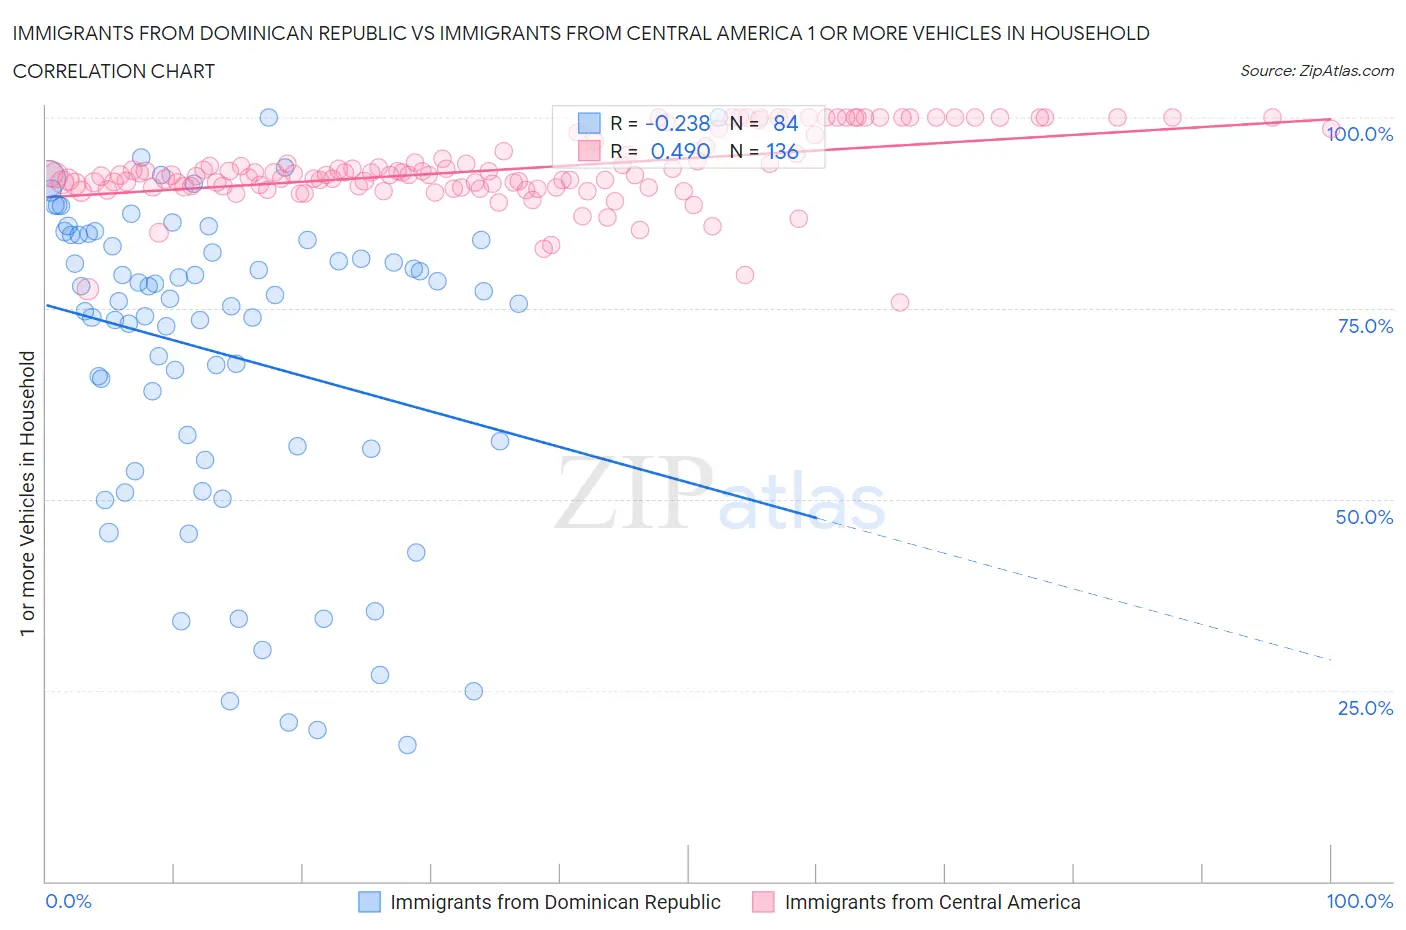 Immigrants from Dominican Republic vs Immigrants from Central America 1 or more Vehicles in Household